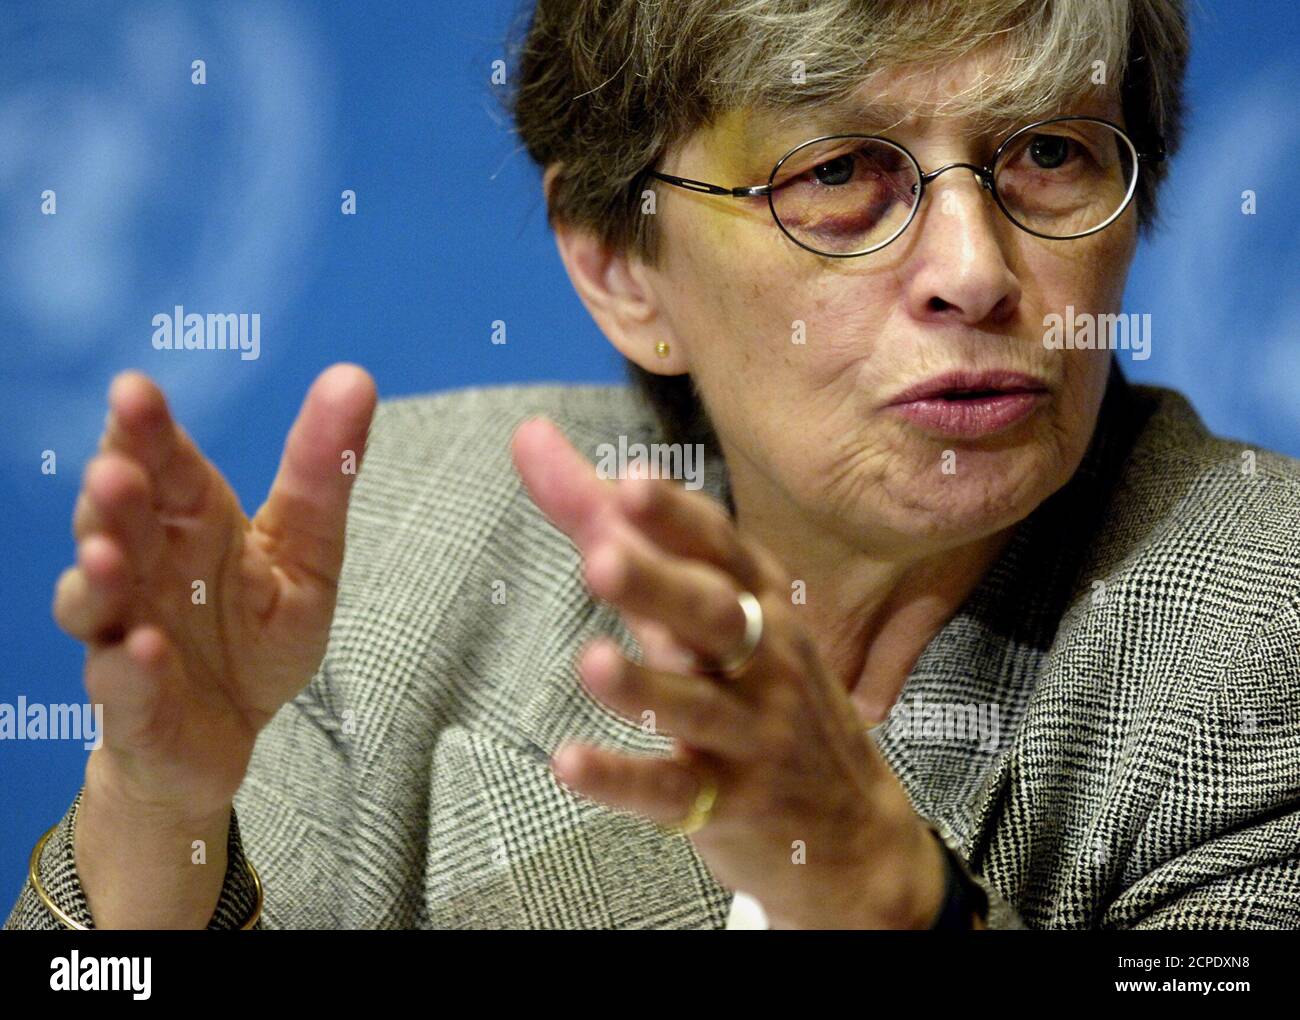 UNICEF's Executive Director Carol Bellamy launches a report on gender parity in primary school attendance at a news conference in Geneva.  UNICEF's Executive Director Carol Bellamy launches a report titled 'Progress for Children: A Report Card On Gender Parity And Primary Education' during a news conference at the United Nations European headquarters in Geneva, Switzerland, April 18, 2005. Bellamy, who will step down from office on April 30 after ten years at the head of the United Nations Children's Fund, pointed out that despite gains in girl's education worldwide, millions are still missing Stock Photo